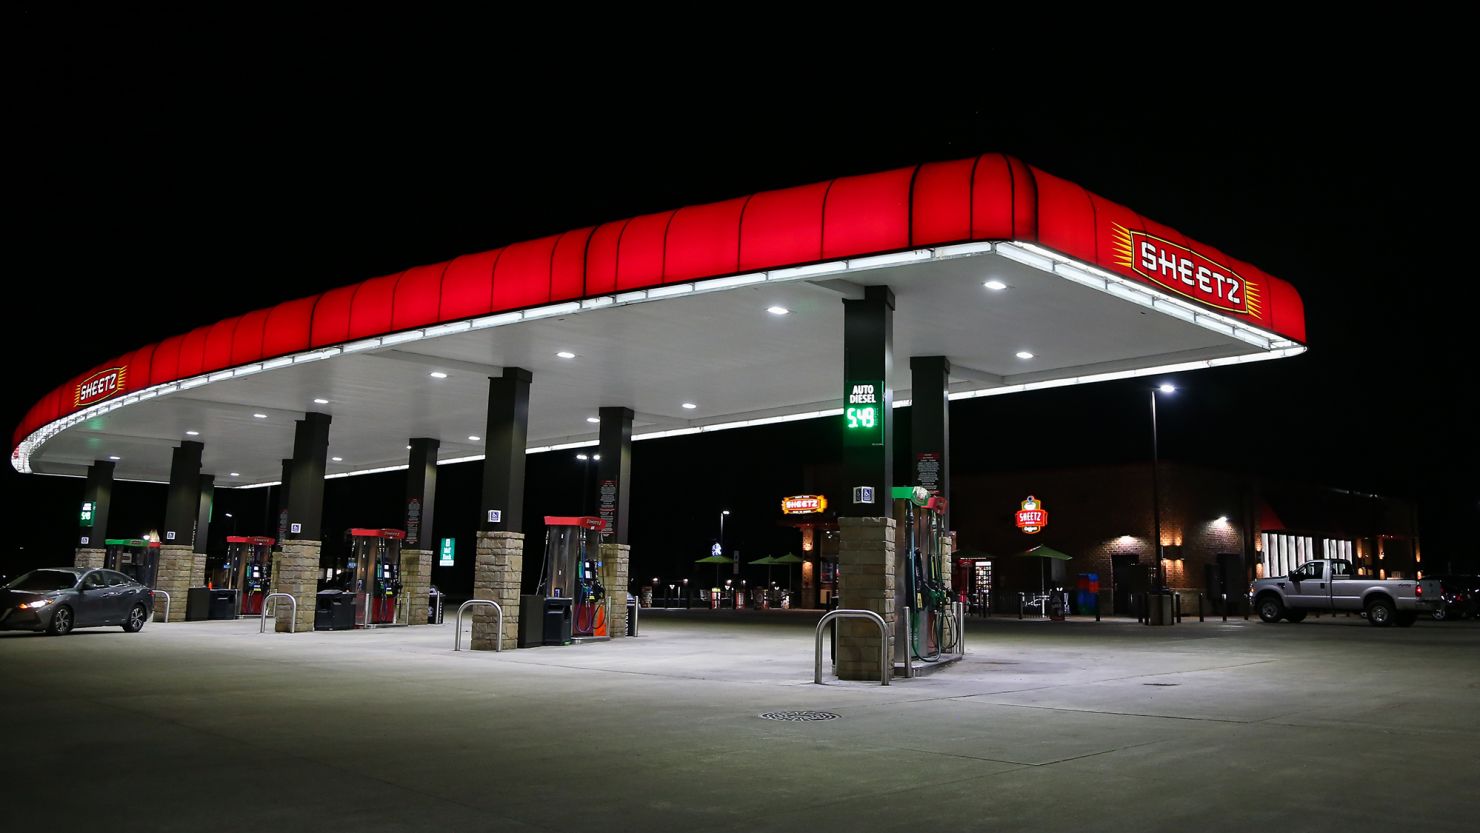 Gas pumps are seen at a Sheetz gas station in Elysburg, Pennsylvania on March 8, 2022. According to a lawsuit filed by the US Equal Employment Opportunity Commission on Thursday, the company's criminal screening process disproportionately screened out Black, Native American and multiracial applicants.